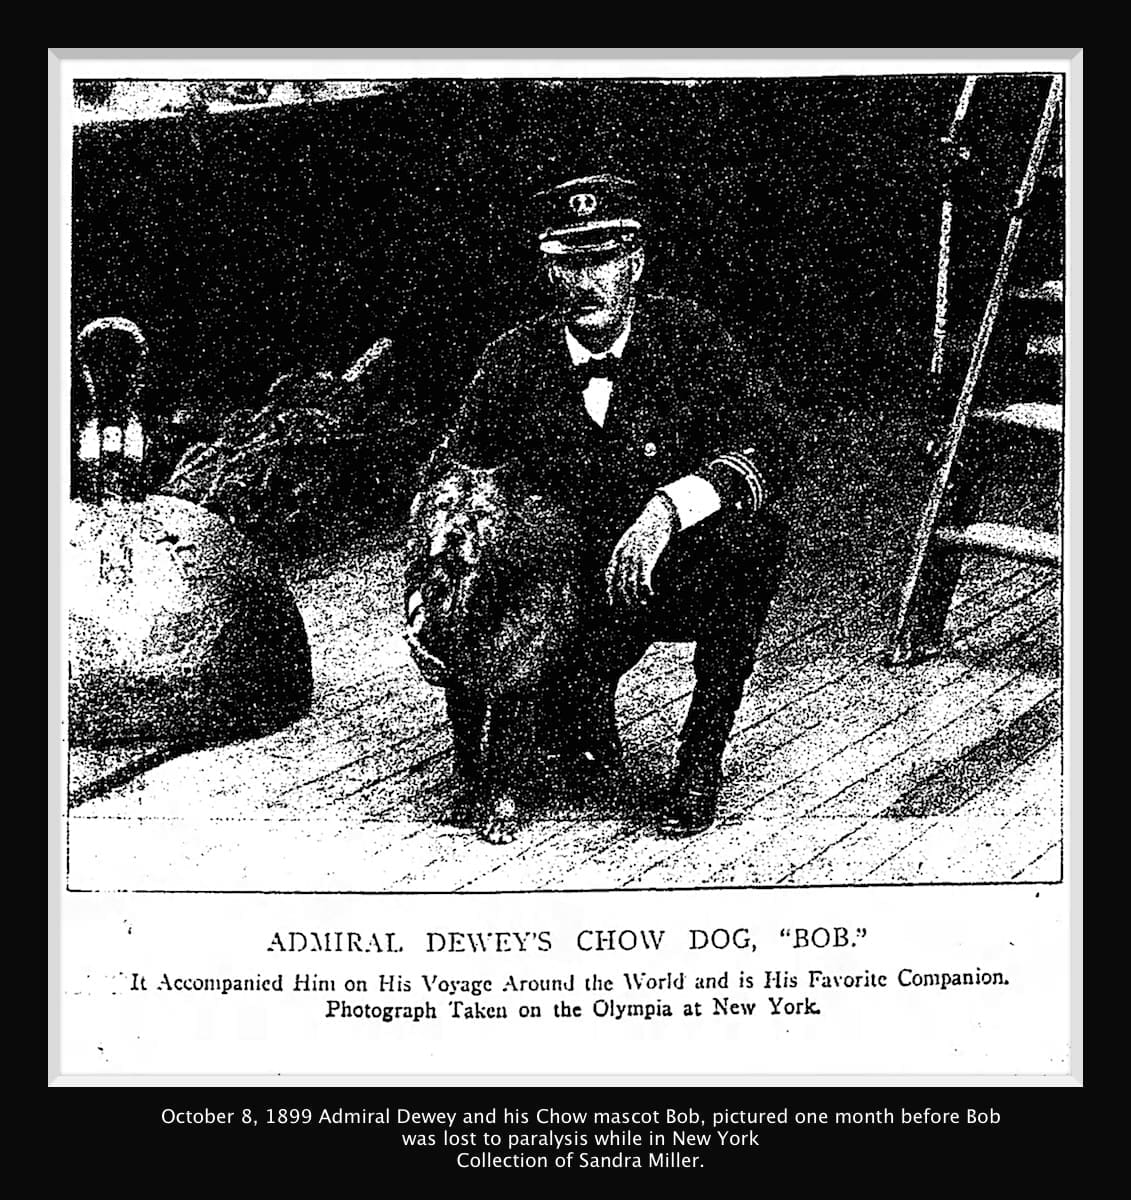 Admiral Dewey and Bob photograph Oct 8 1899 one month before Bob died . On Olympia in New York